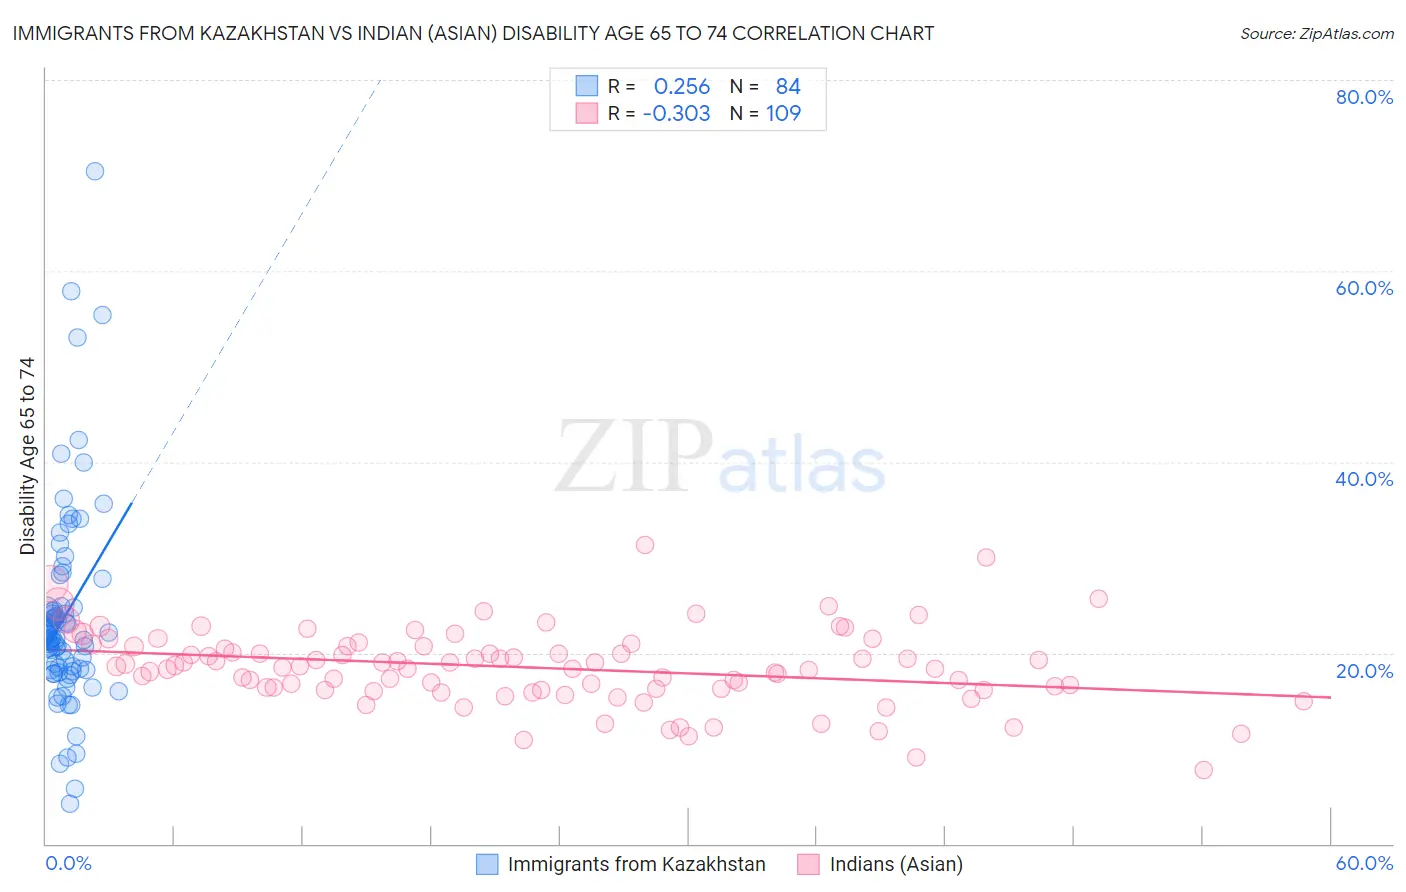 Immigrants from Kazakhstan vs Indian (Asian) Disability Age 65 to 74